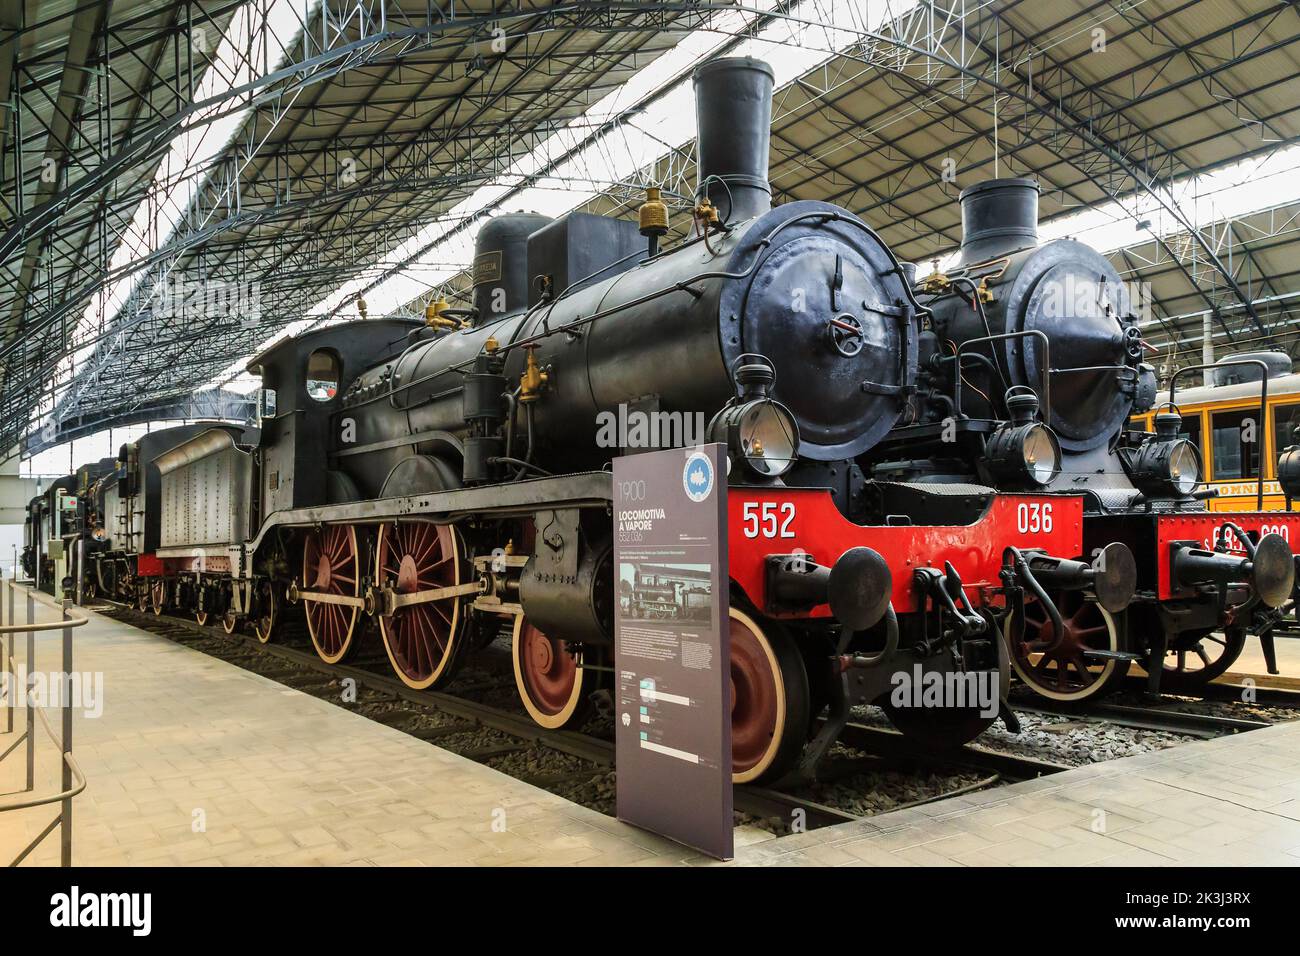 MILAN, ITALY - MAY 19, 2018: This is a collection of locomotives beginning of the twentieth century in the Museum of Science and Technology. Stock Photo